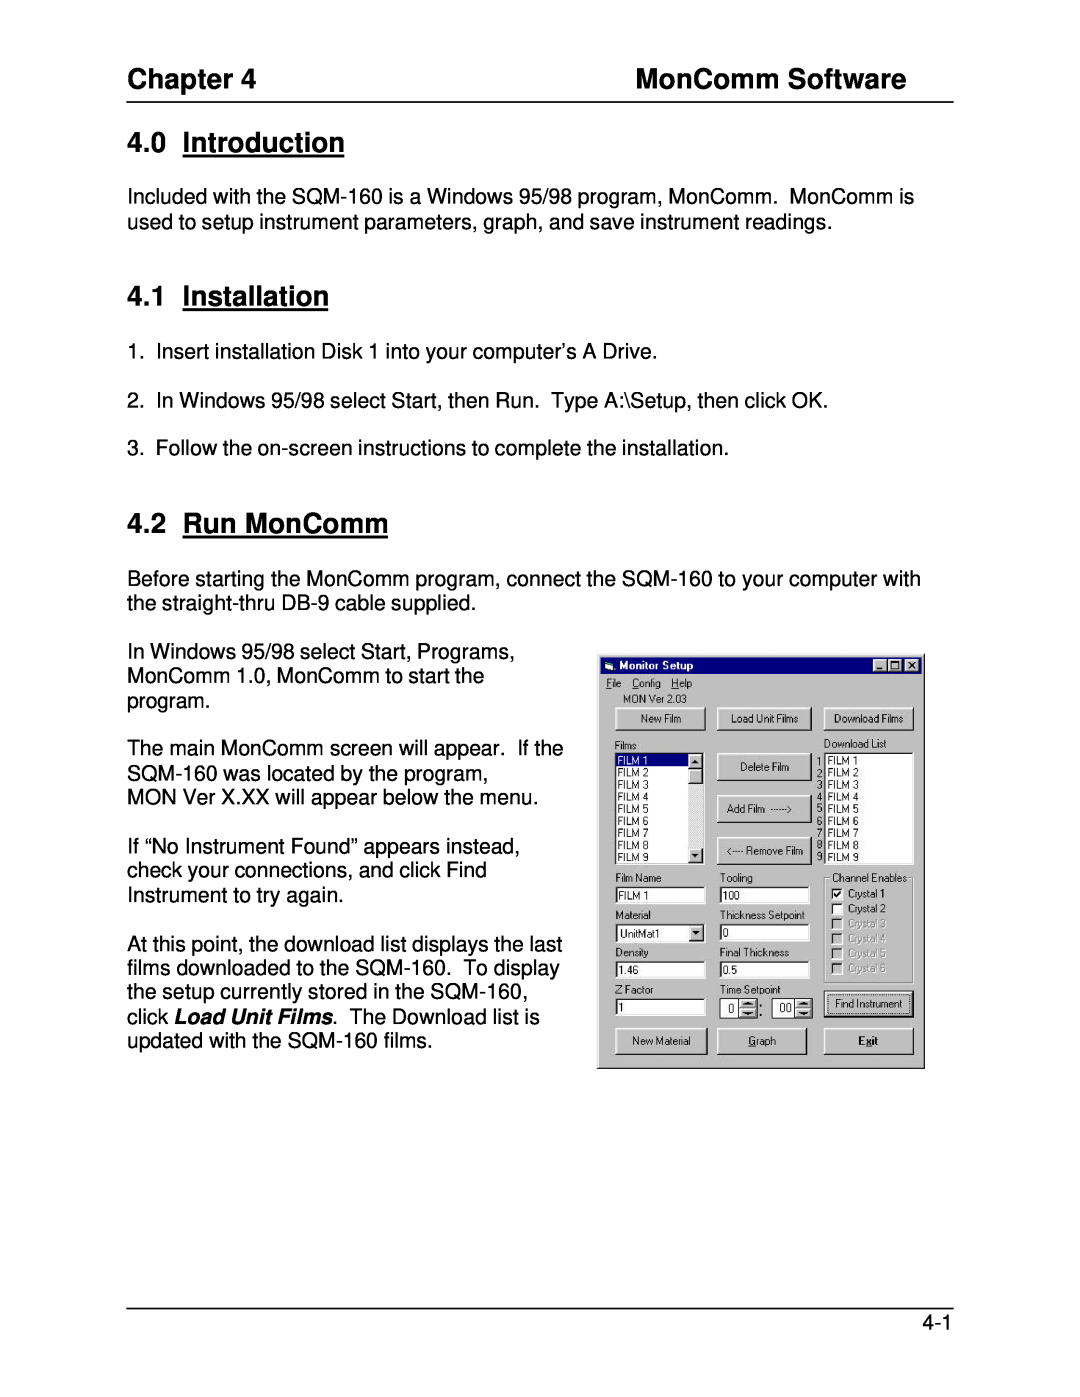 Sigma SQM-160 manual Introduction, Installation, Run MonComm, Chapter, MonComm Software 